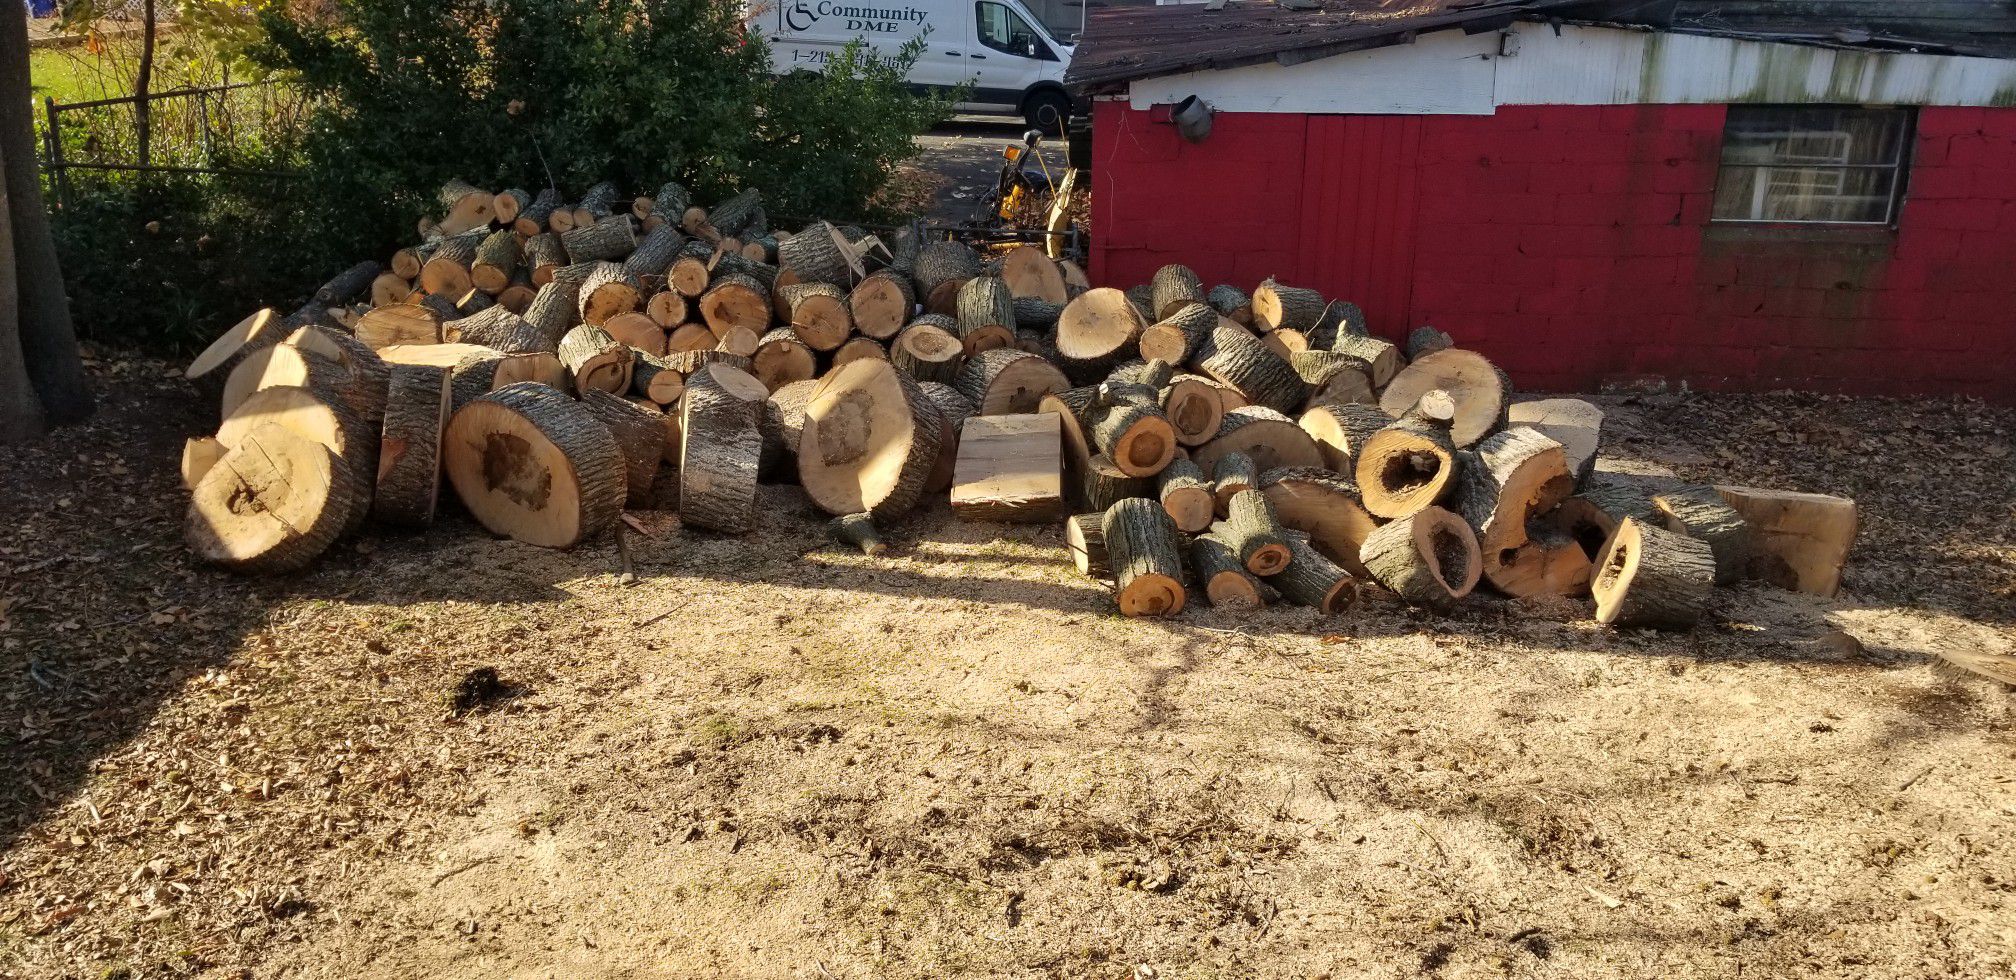 Winter is coming! Free Firewood!